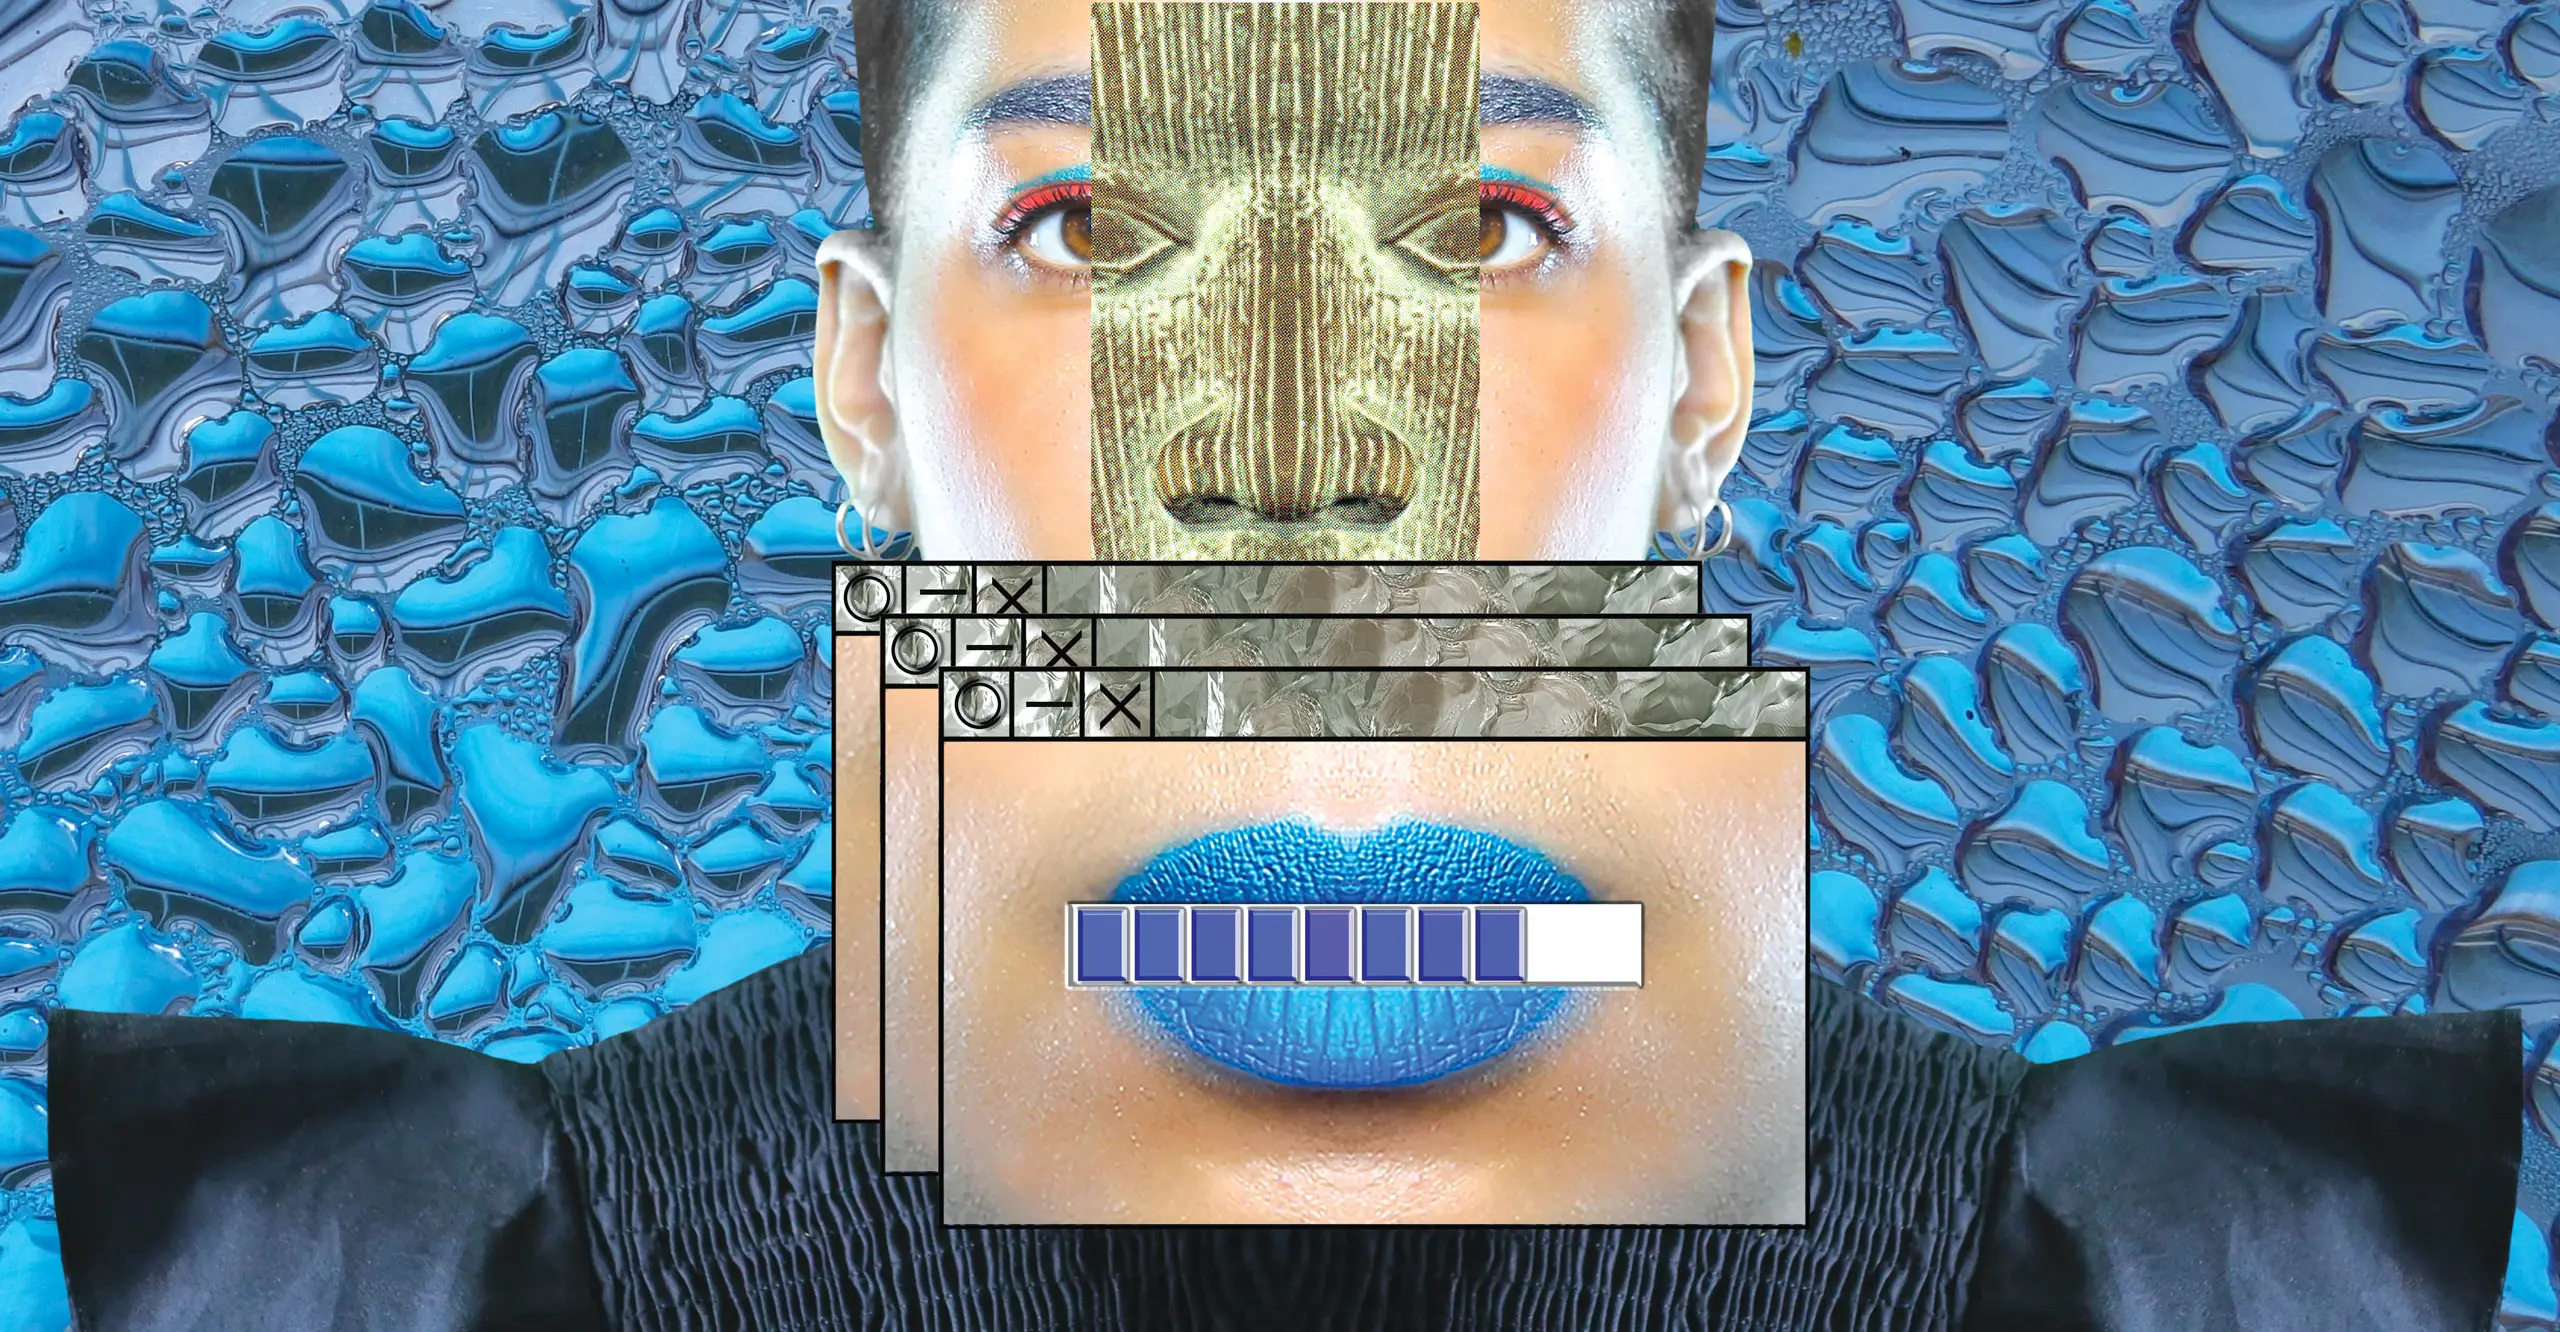 The features of a woman's face against a blue patterned background are replaced by small computer windows picturing different features